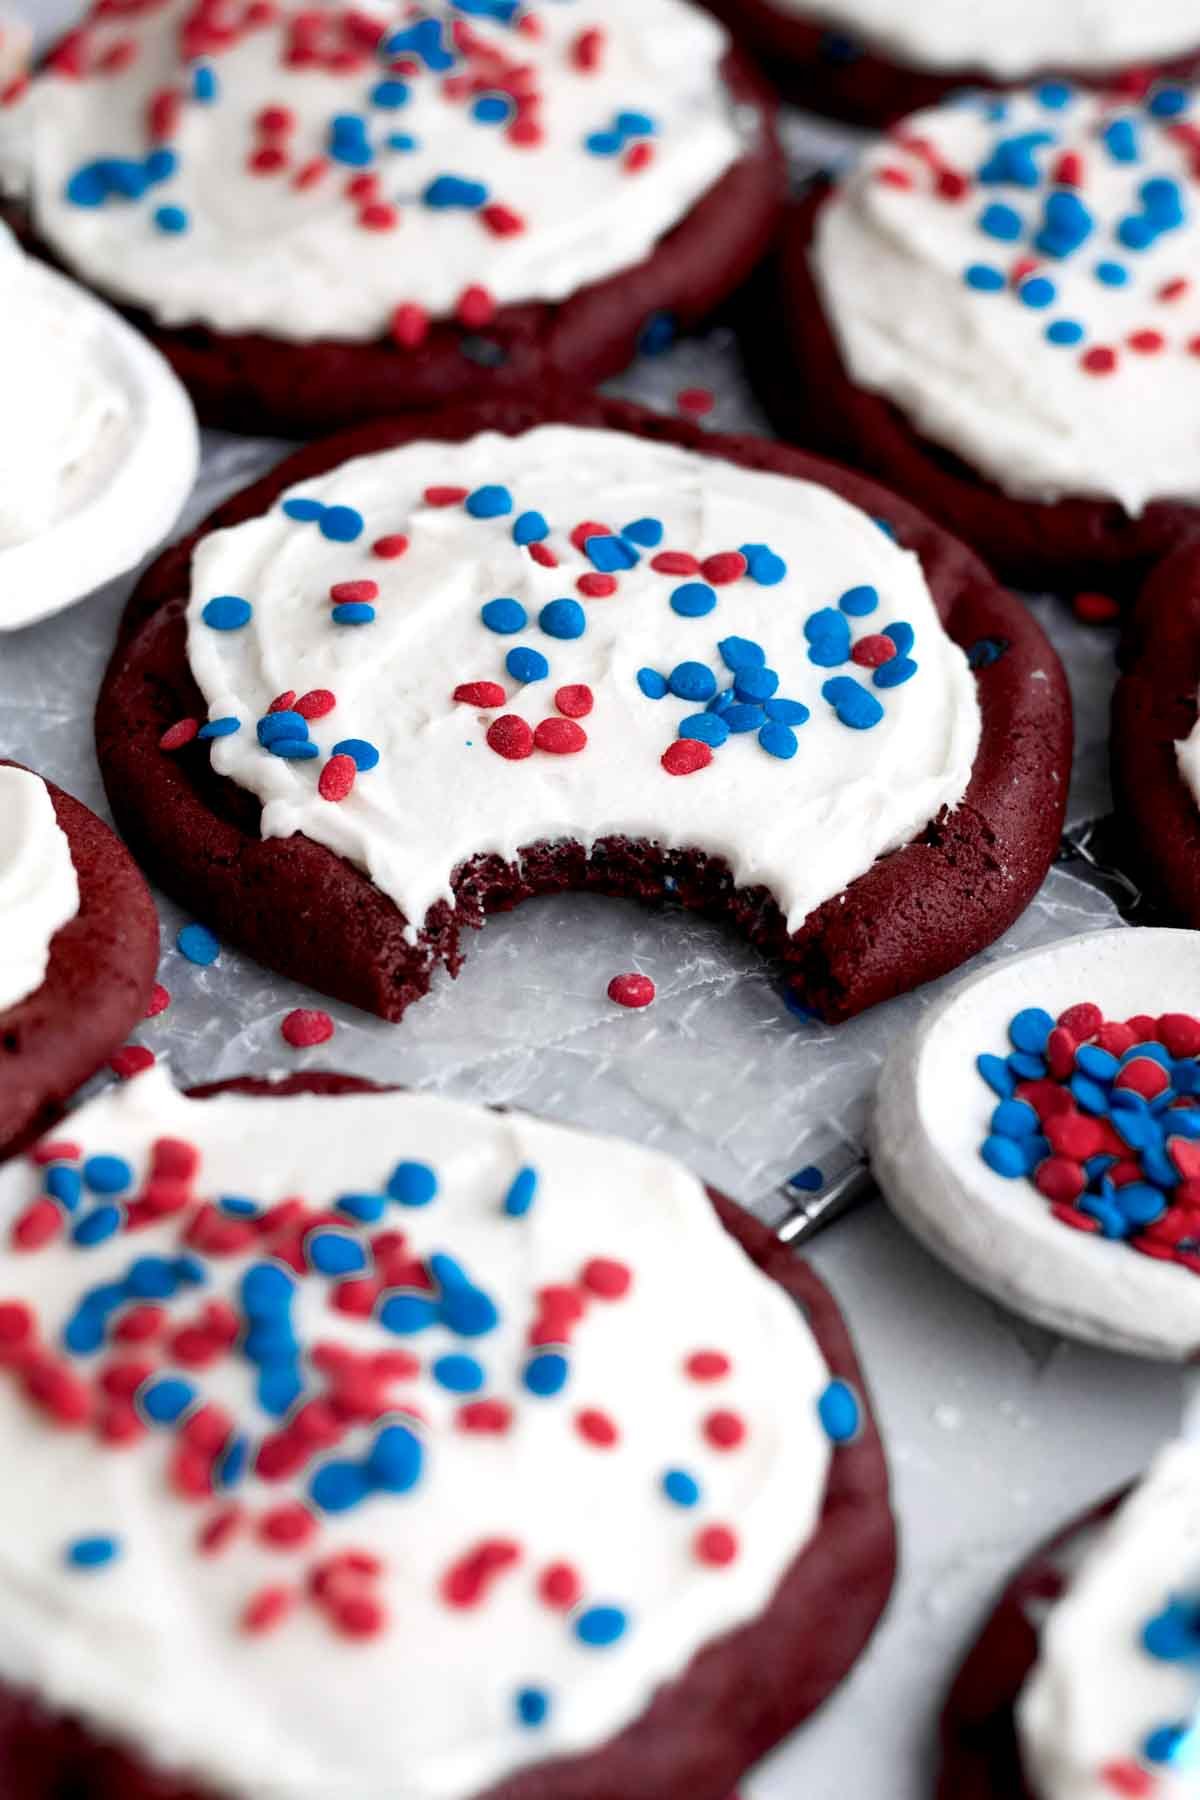 A bite reveals the soft insides of the delicious red velvet 4th of July Cookie.